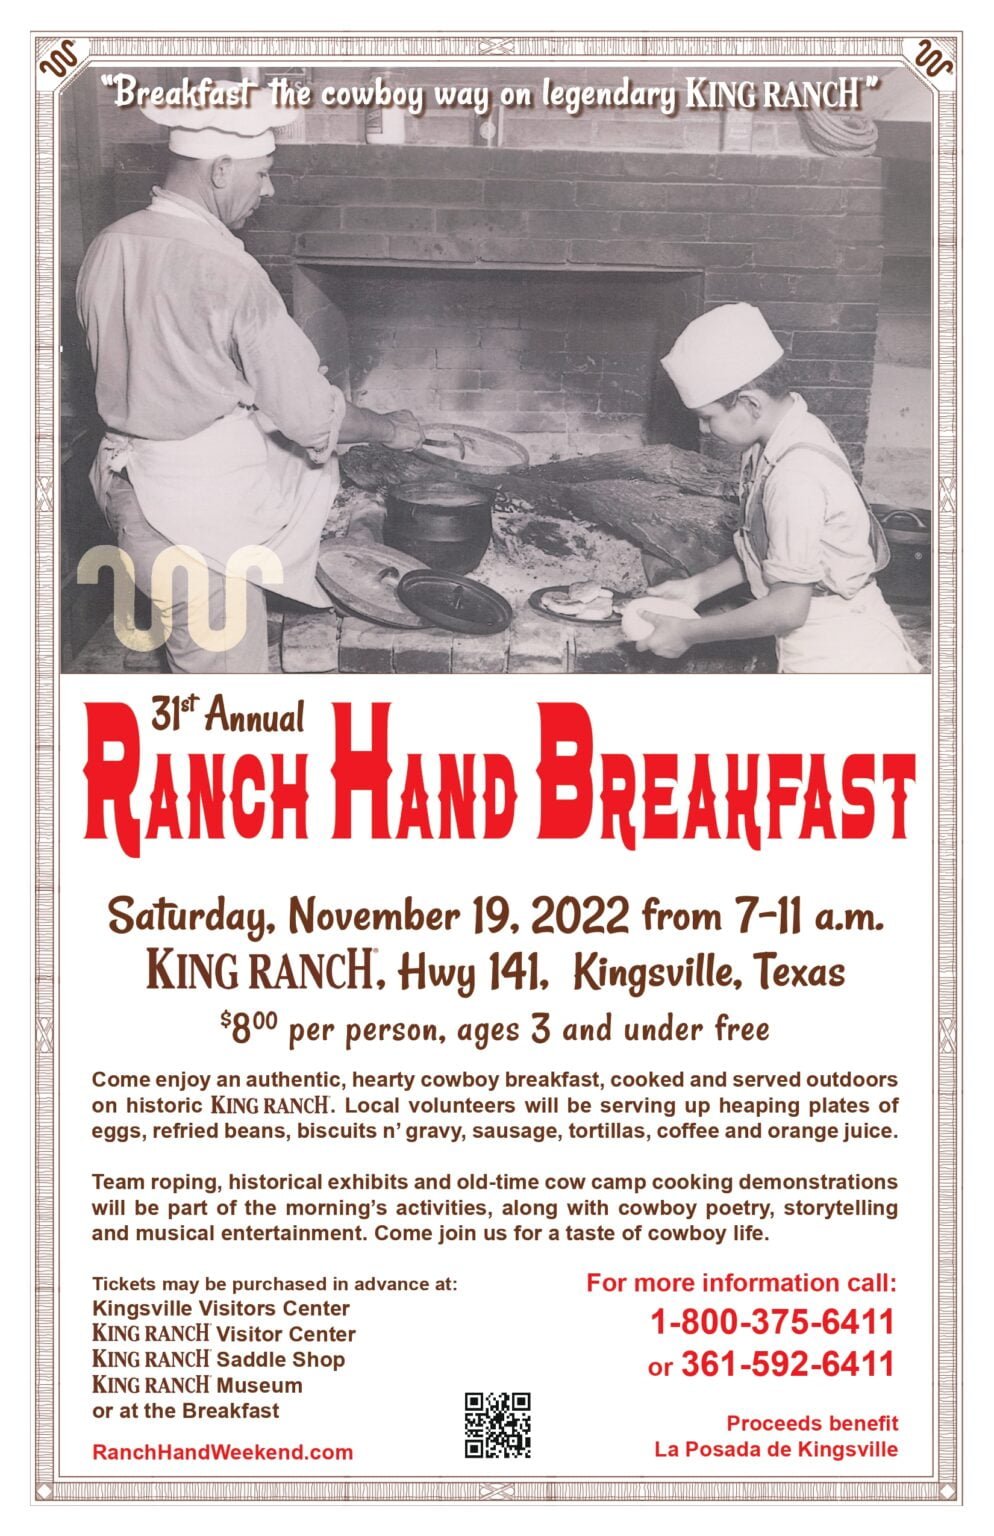 King Ranch to host 31st Annual Ranch Hand Breakfast Ranch Hand Weekend